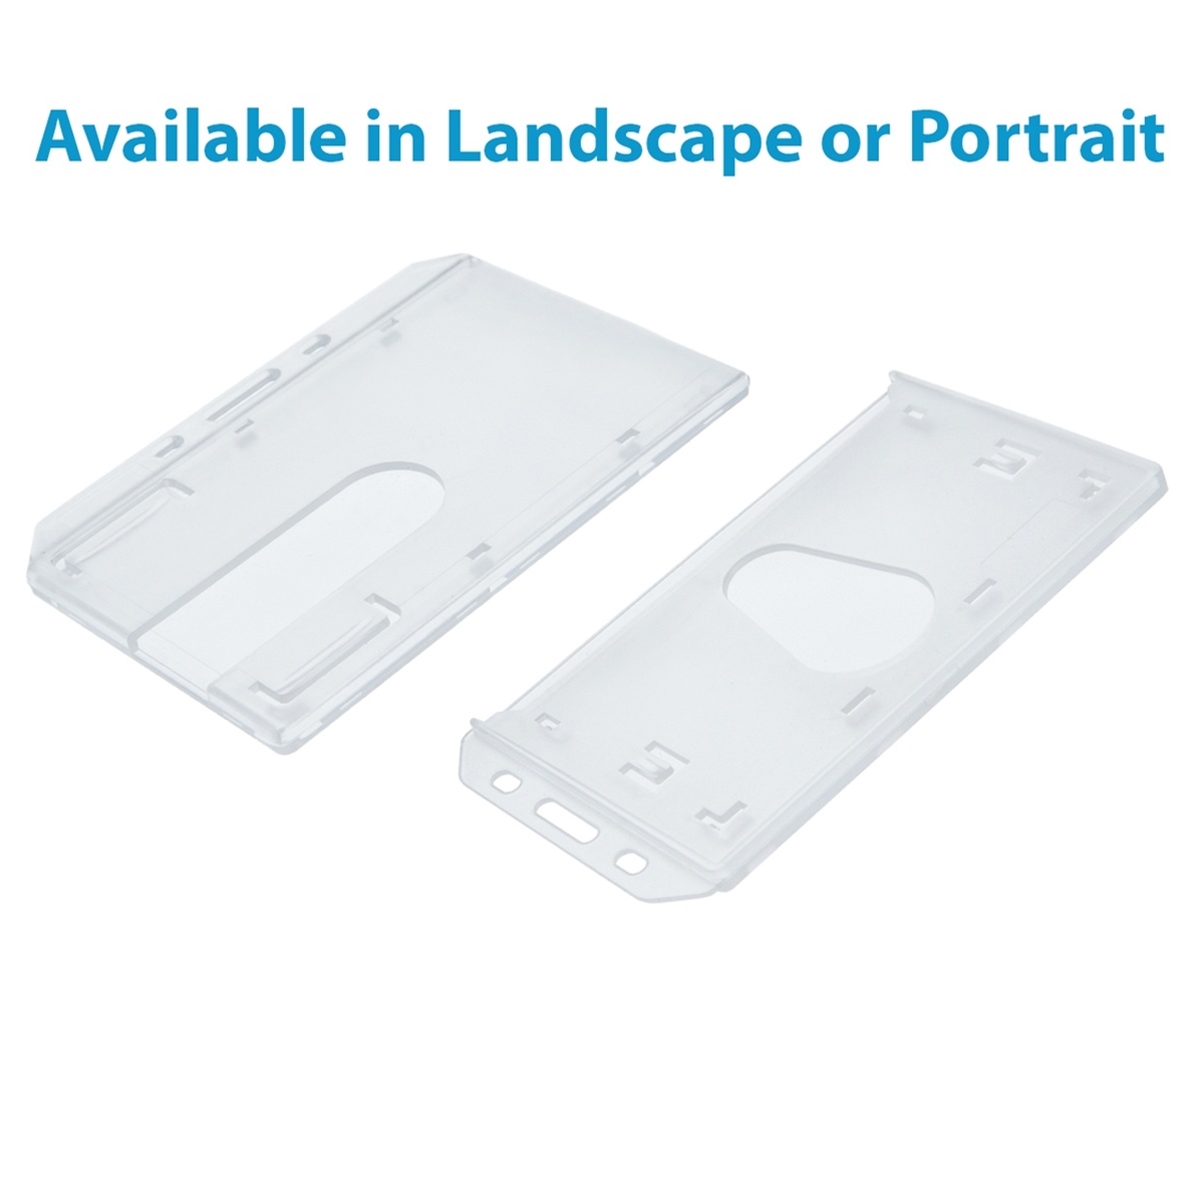 clear enclosed single id card holder with thumb slot in both landscape and portrait postitions